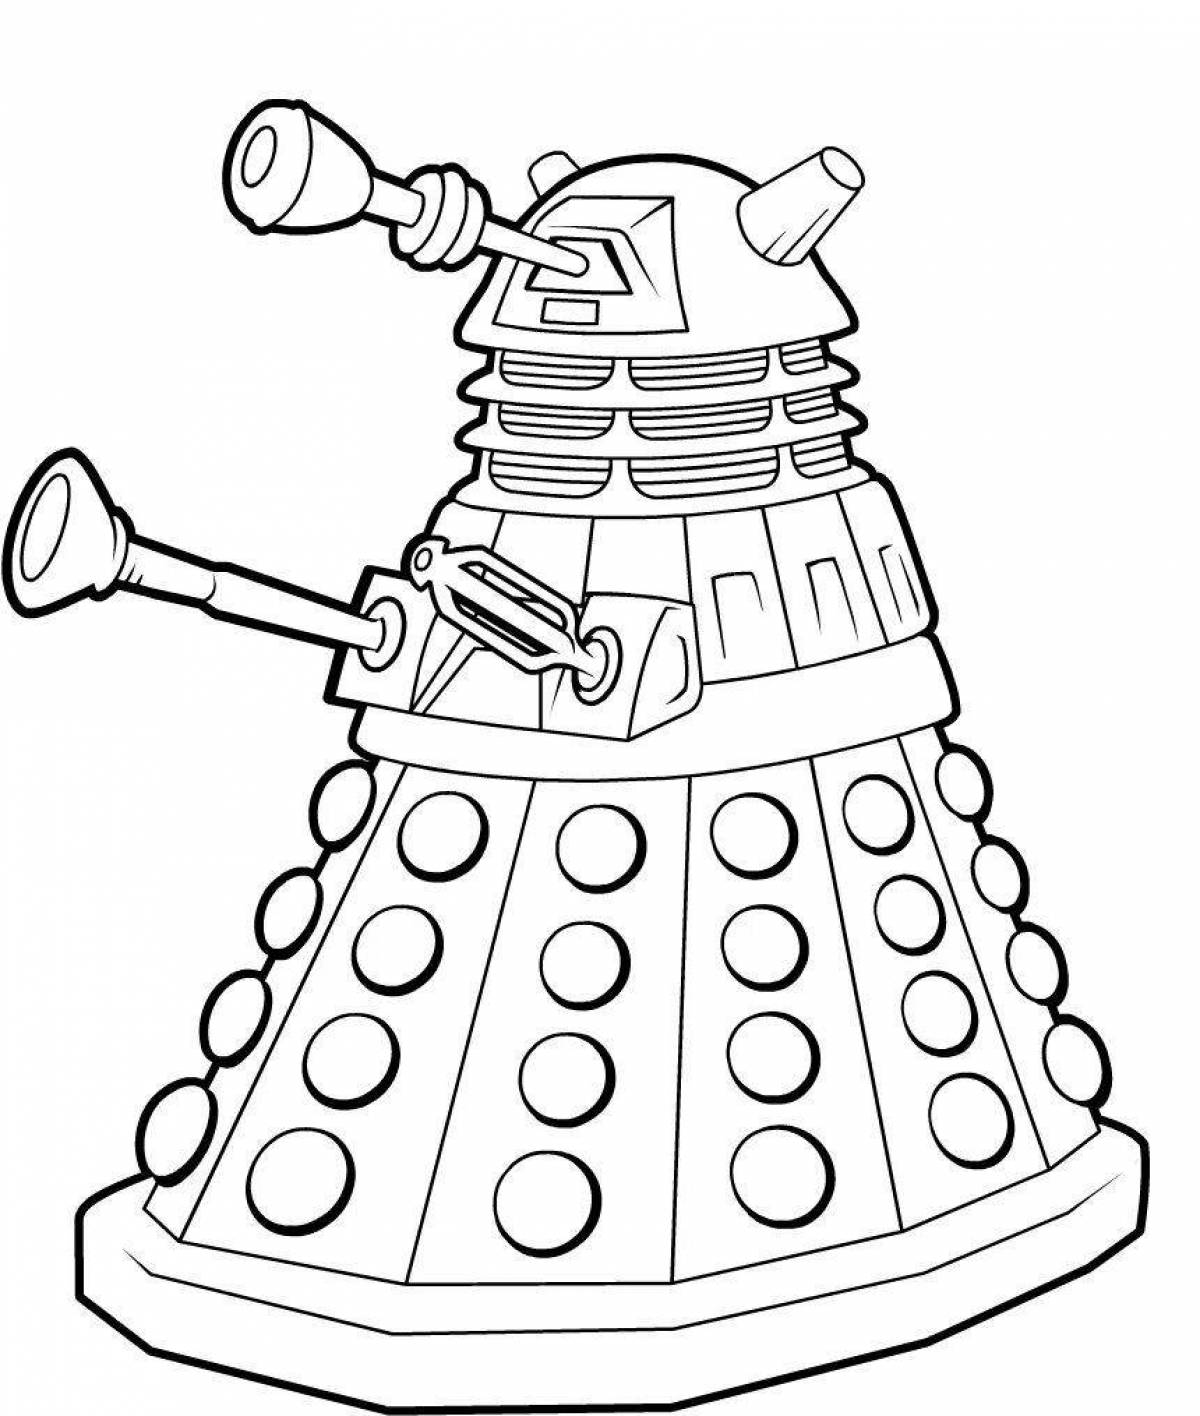 Brilliant doctor who coloring book